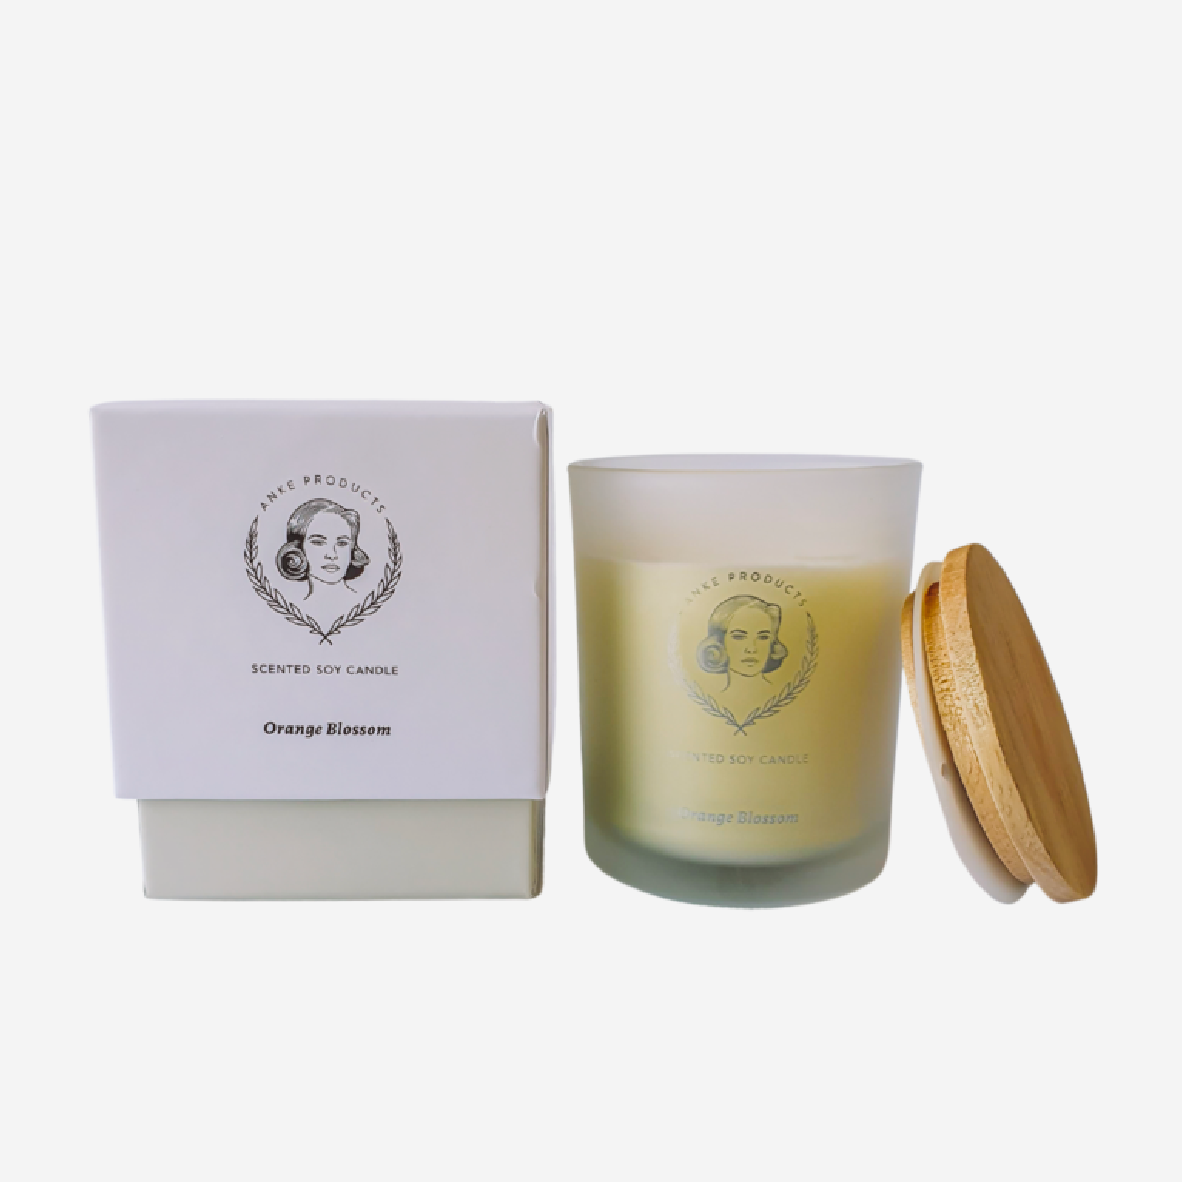 Scented Soy Candle - Orange Blossom